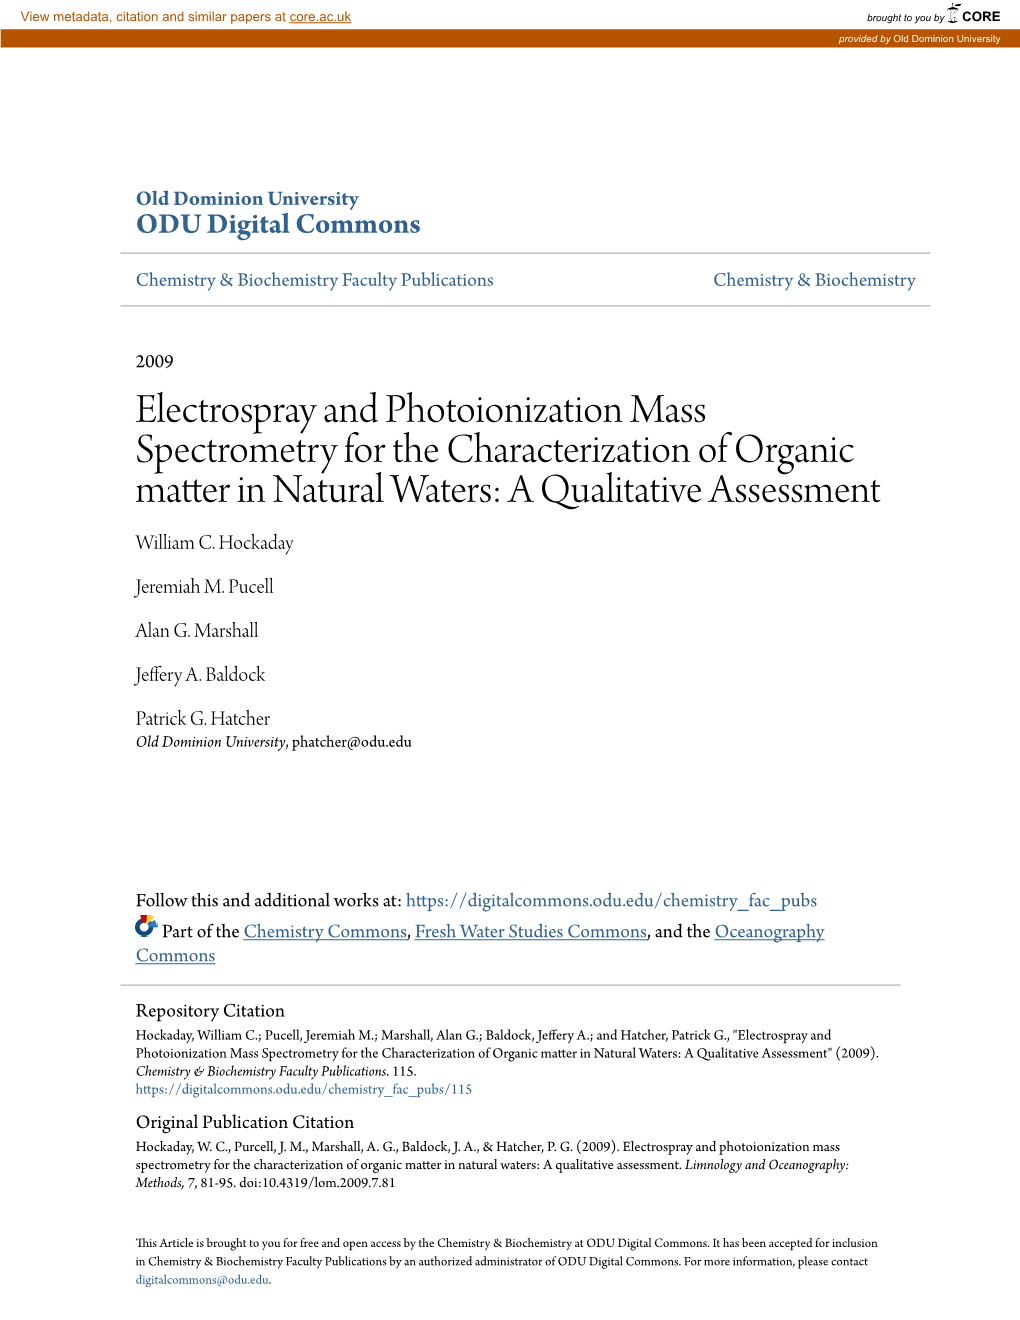 Electrospray and Photoionization Mass Spectrometry for the Characterization of Organic Matter in Natural Waters: a Qualitative Assessment William C